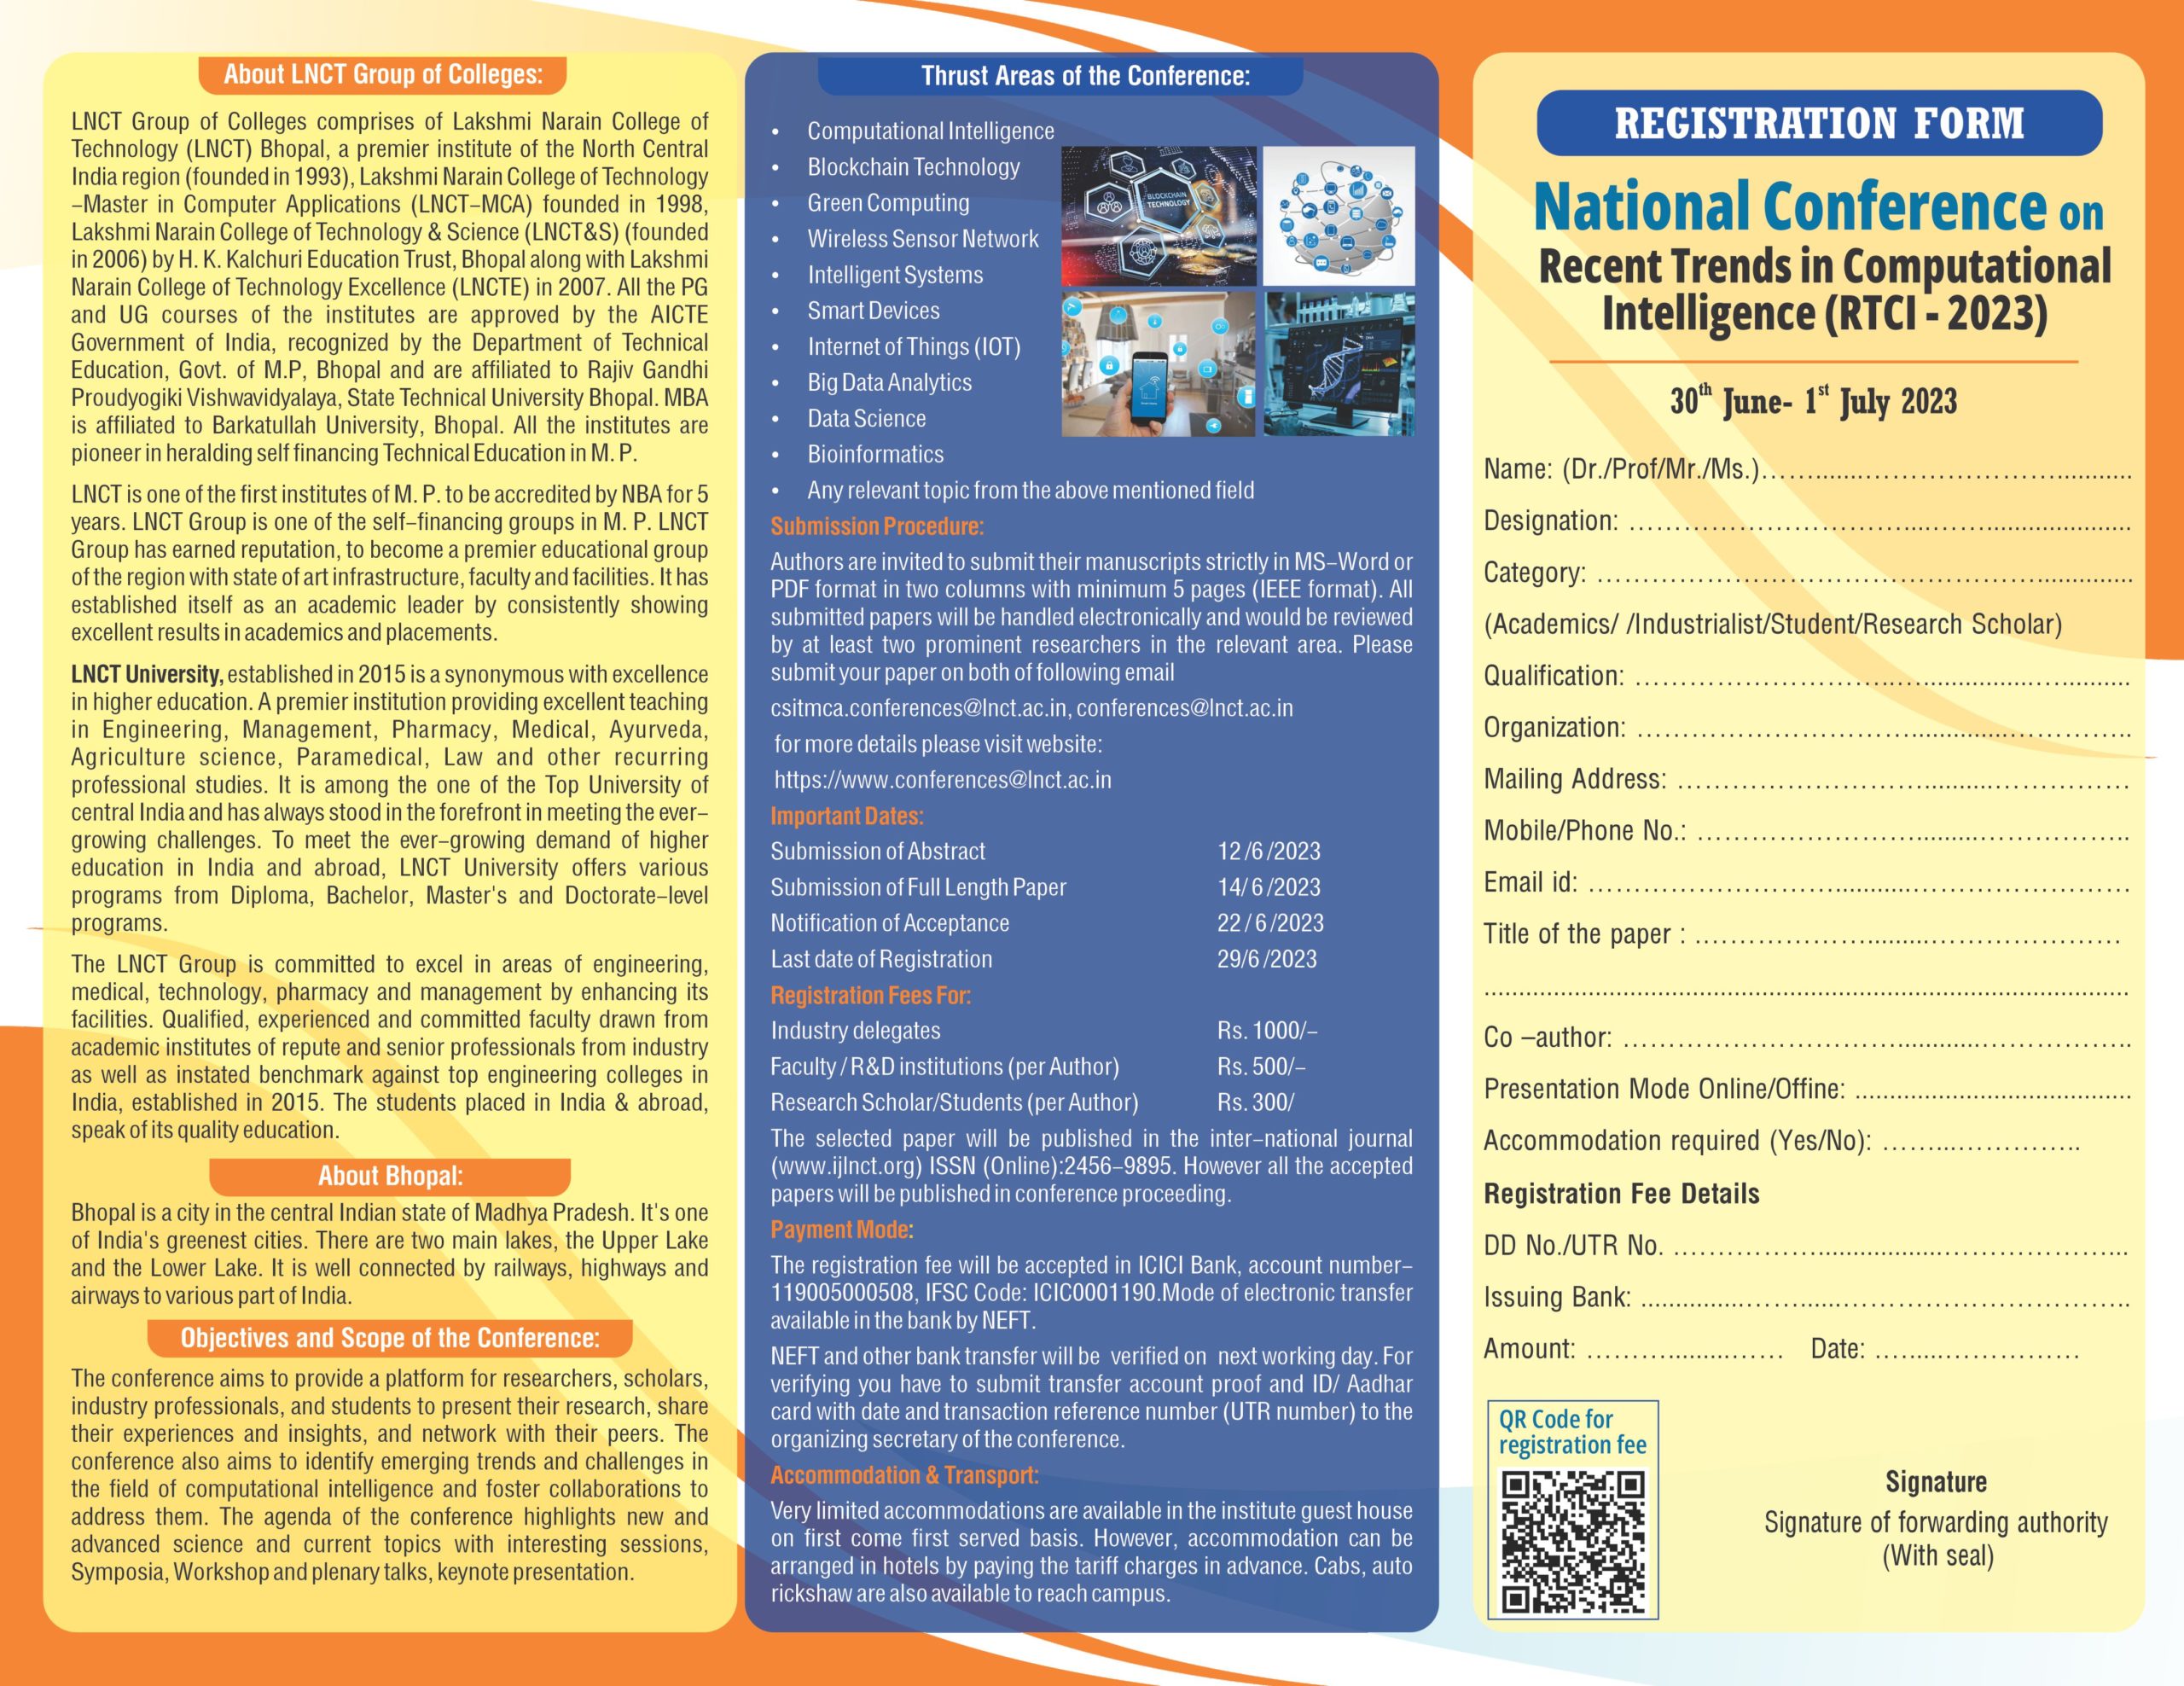 National Conference on Recent Trends in Computational Intelligence 14